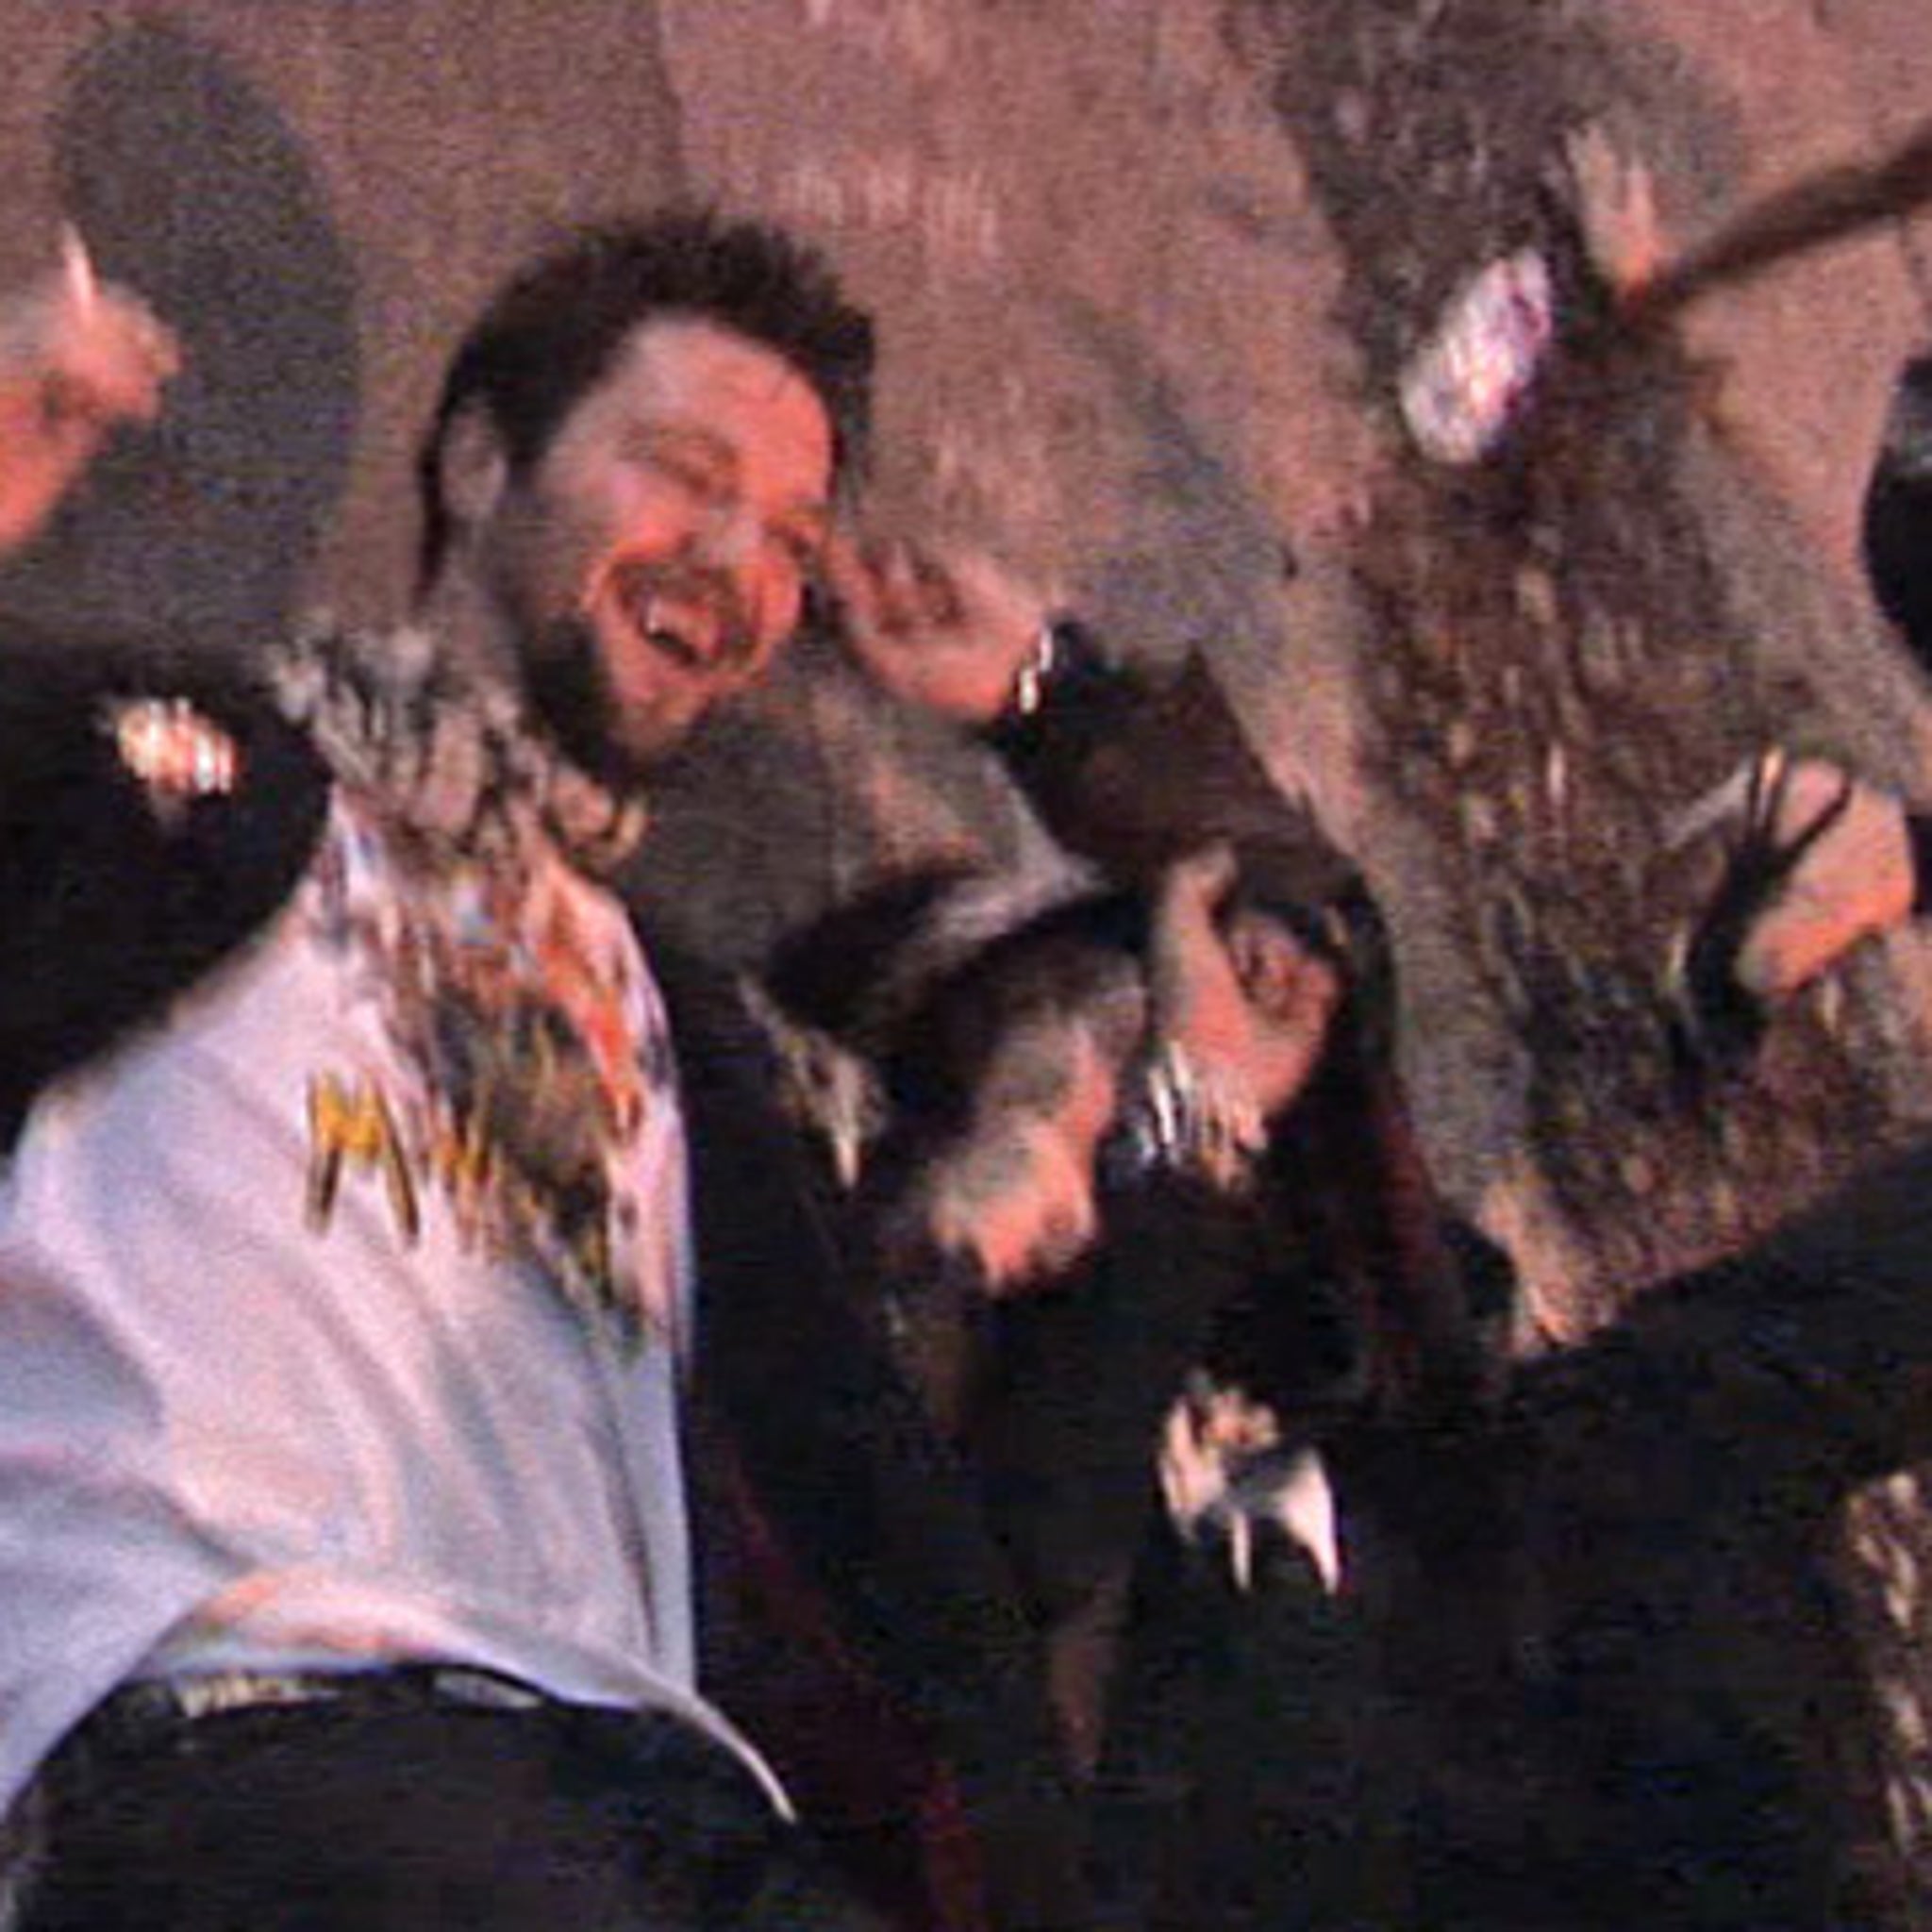 Bam Margera -- Wasted hq pic